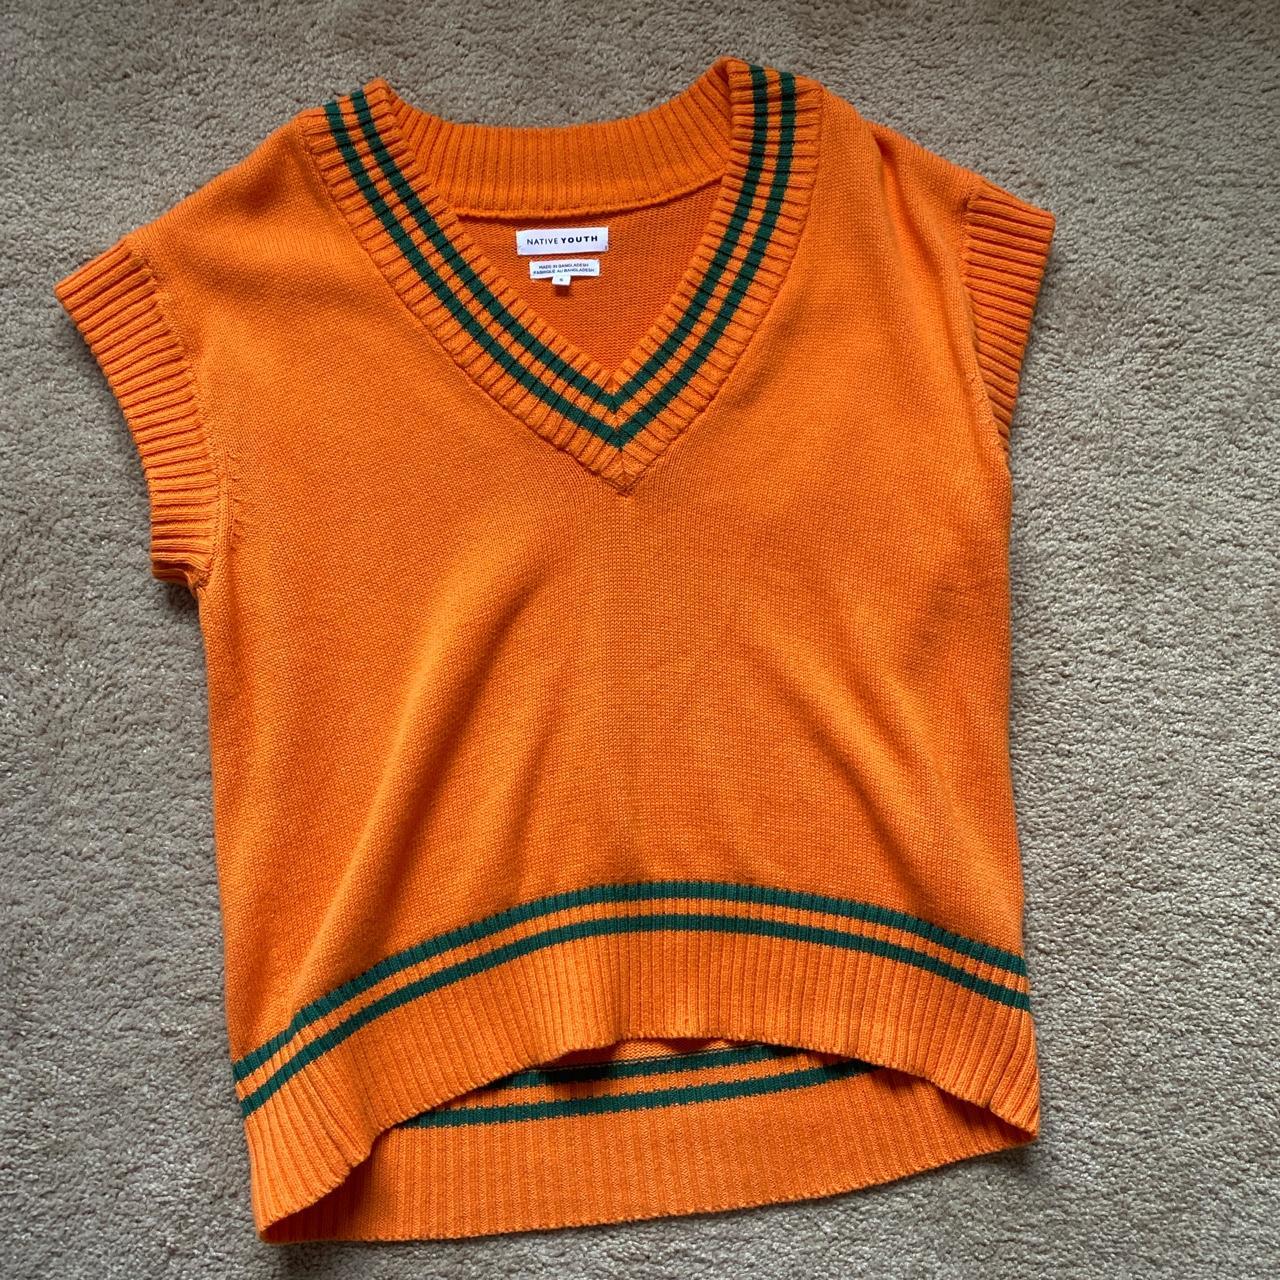 Native Youth Women's Green and Orange Jumper